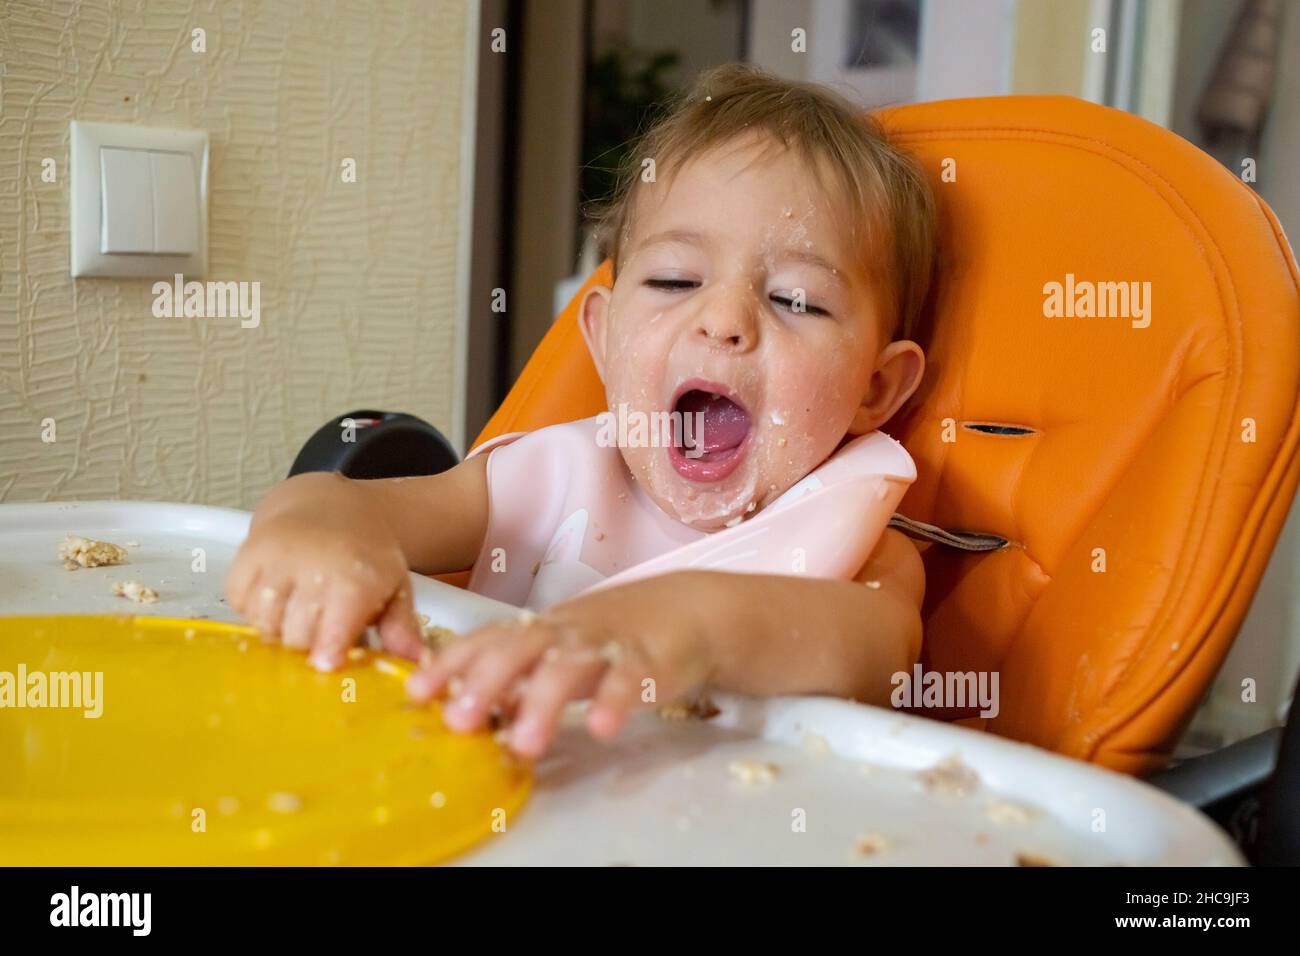 sleepy baby yawn after food in baby chair, child want to sleep Stock Photo